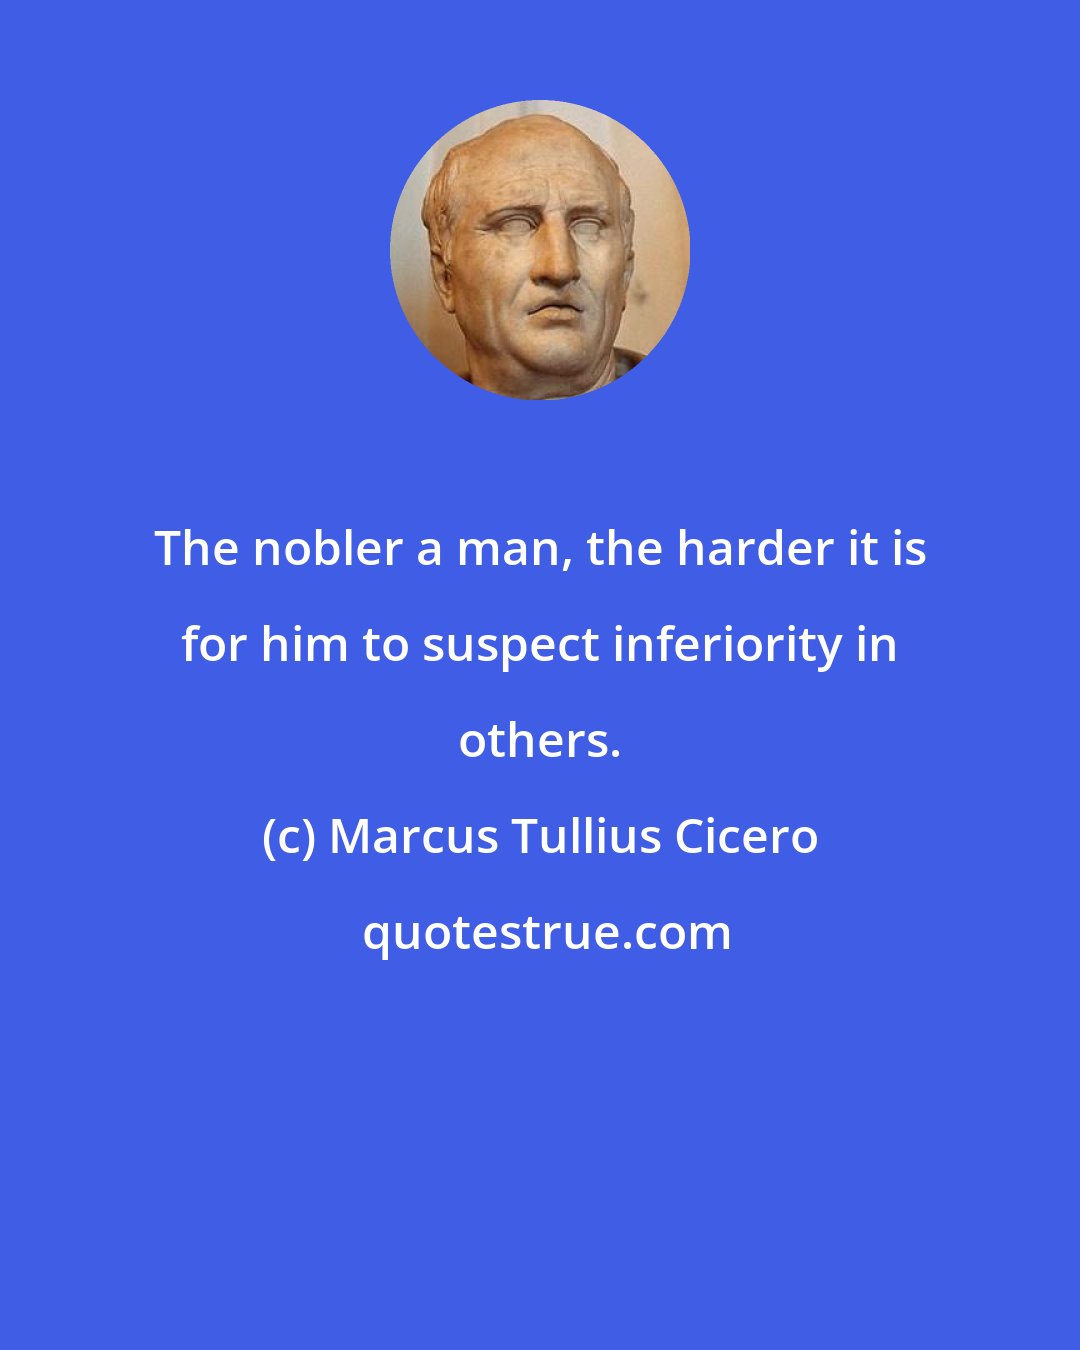 Marcus Tullius Cicero: The nobler a man, the harder it is for him to suspect inferiority in others.